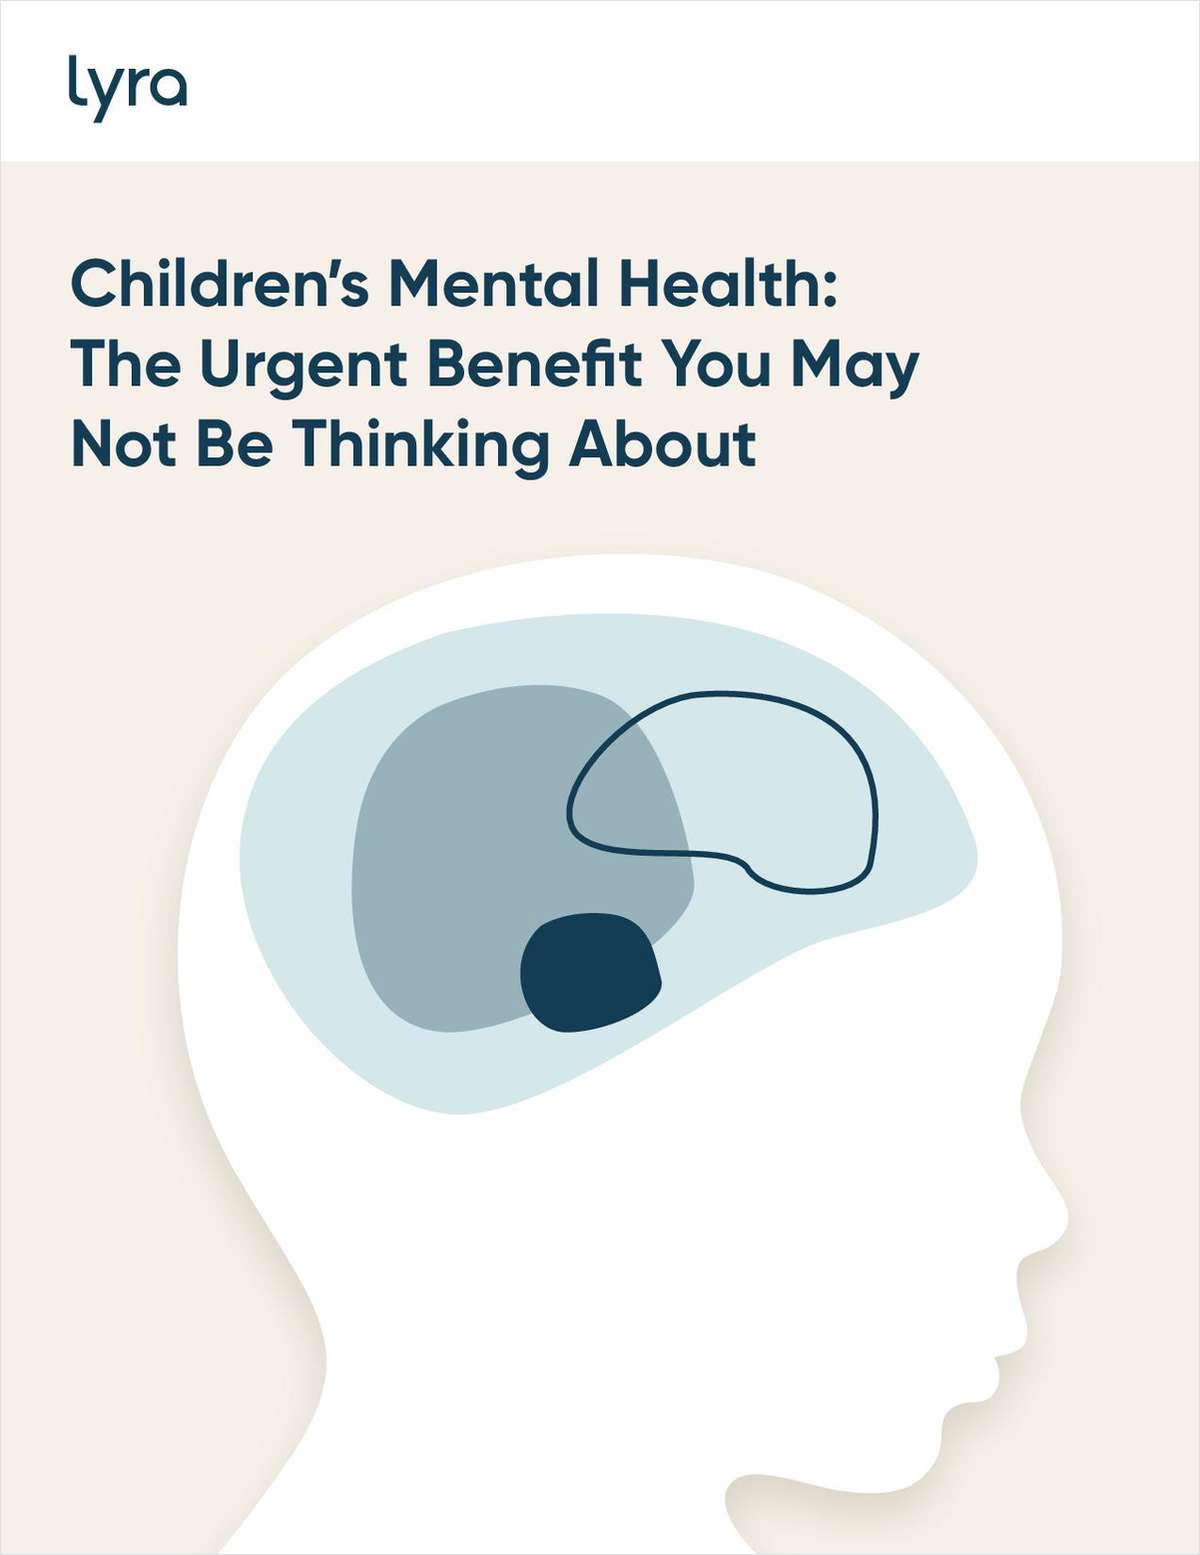 Children's Mental Health: The Urgent Benefit You May Not Be Thinking About